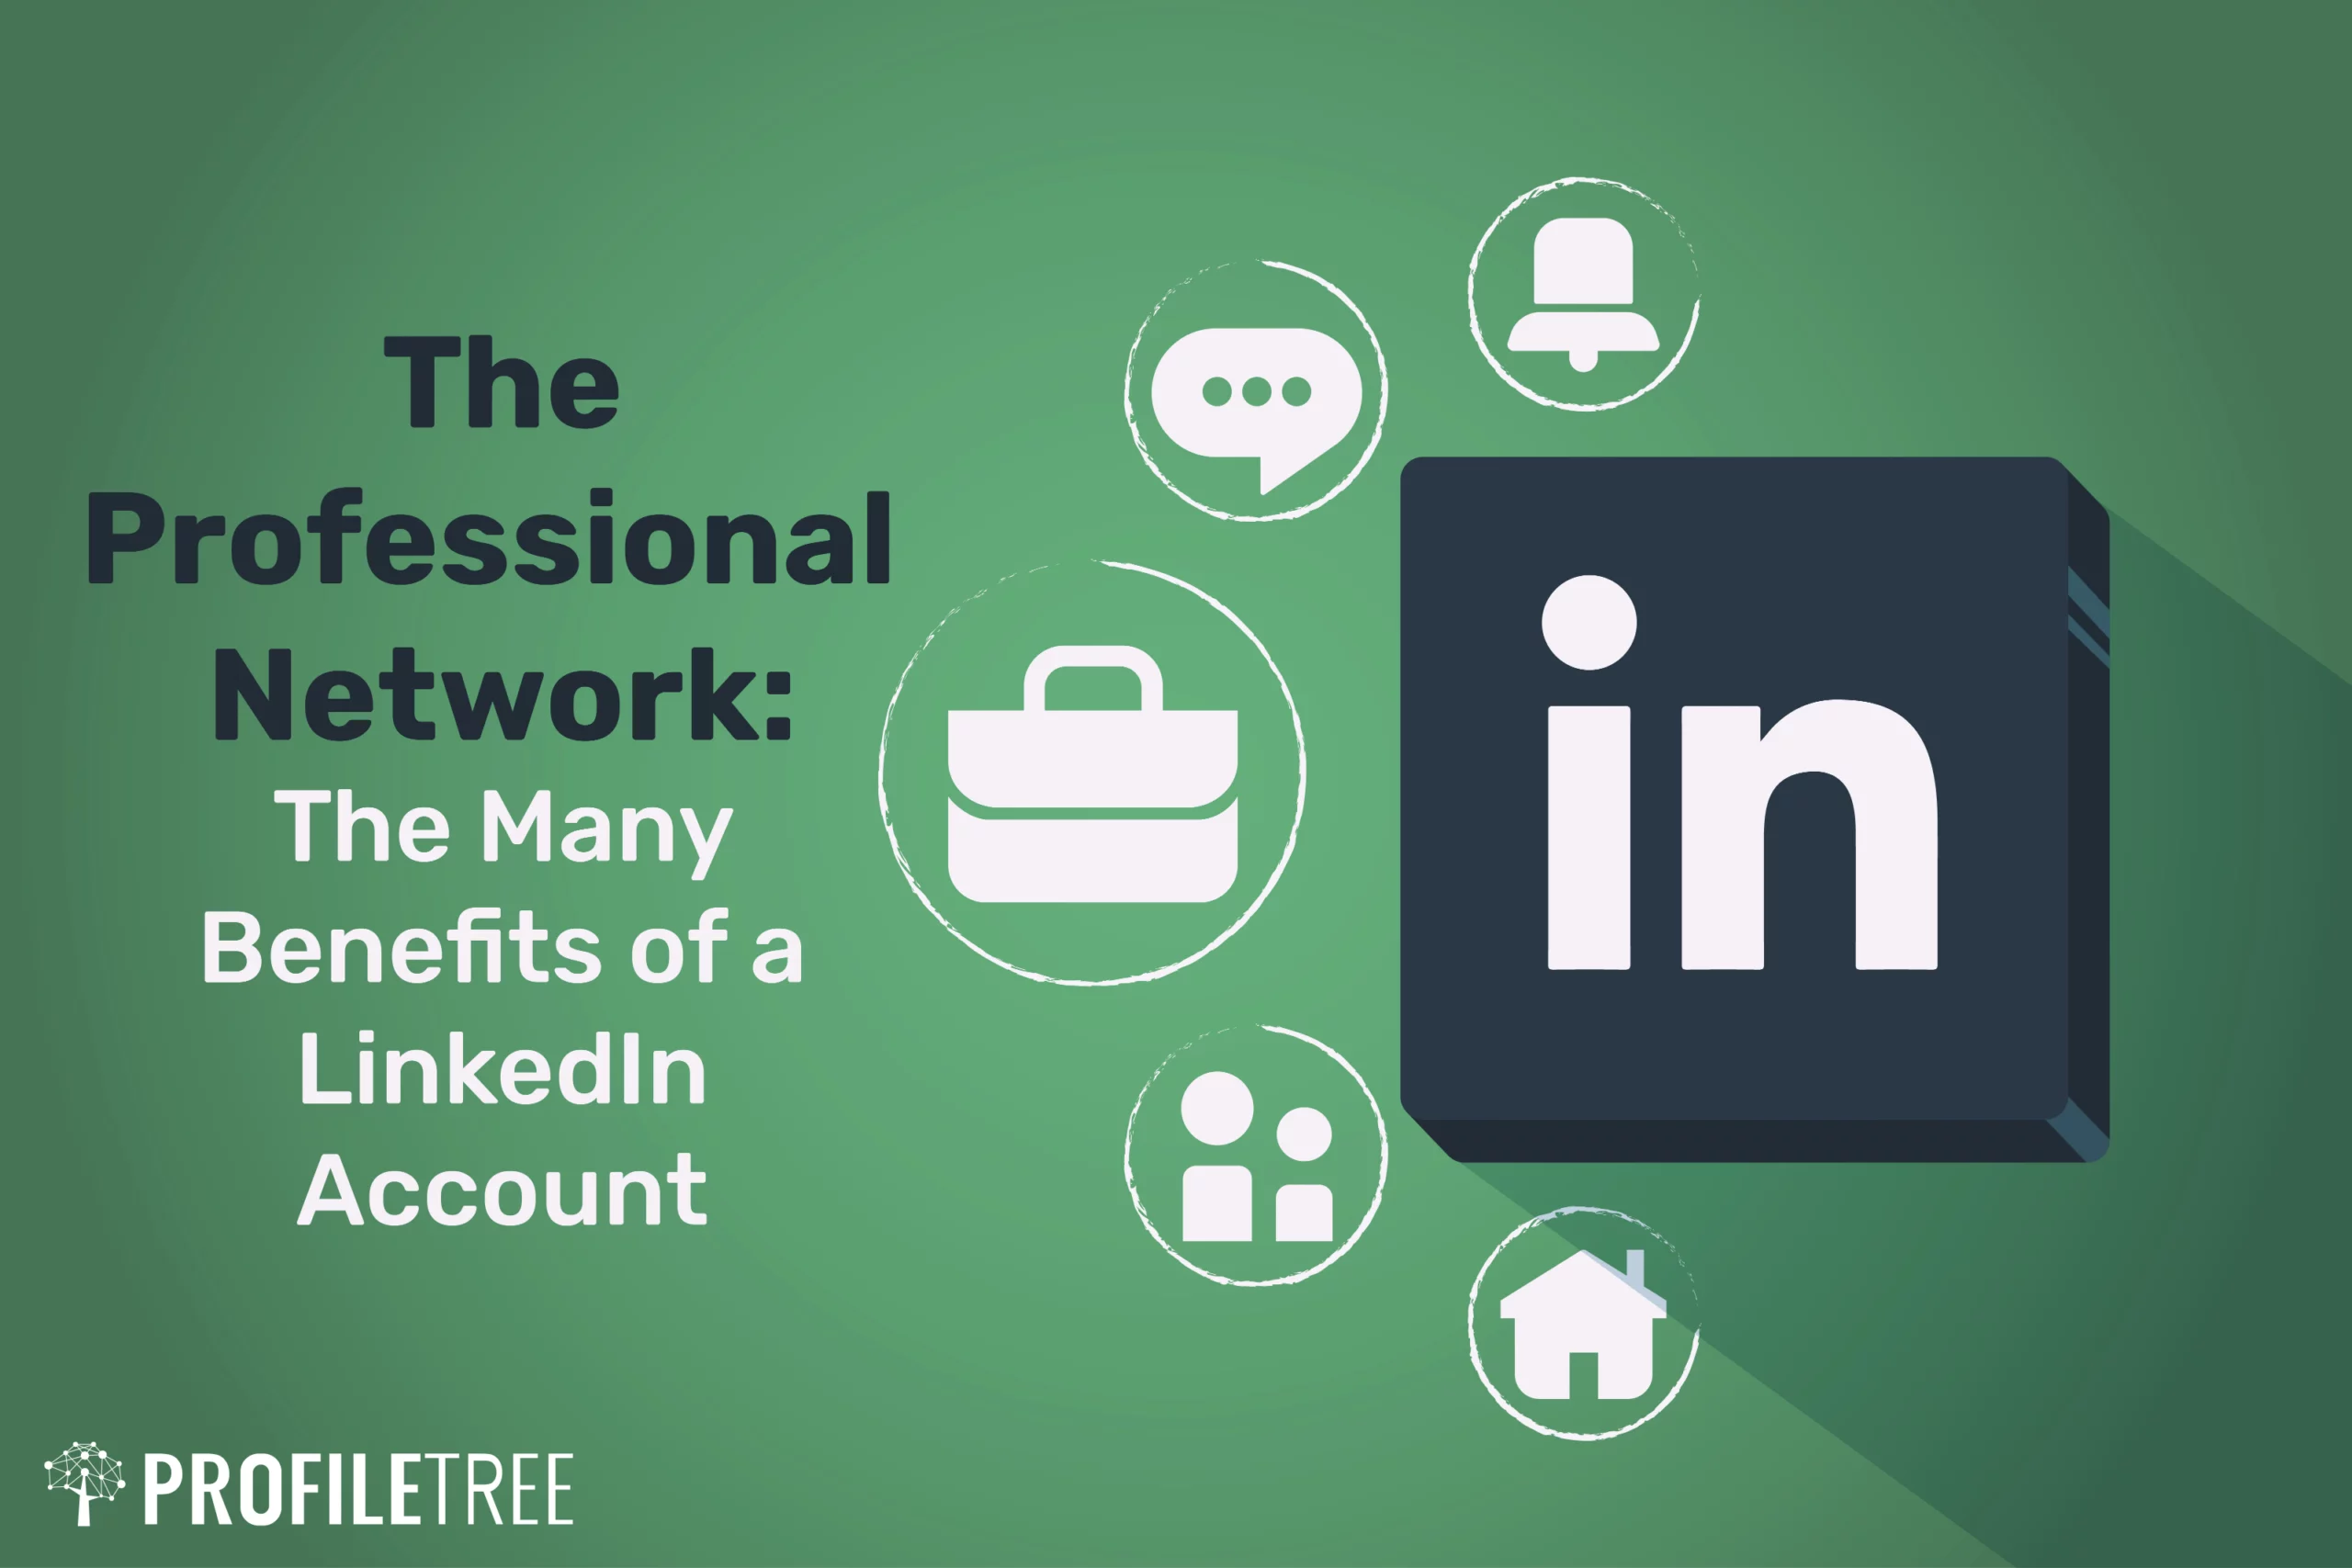 The Professional Network The Many Benefits of a LinkedIn Account